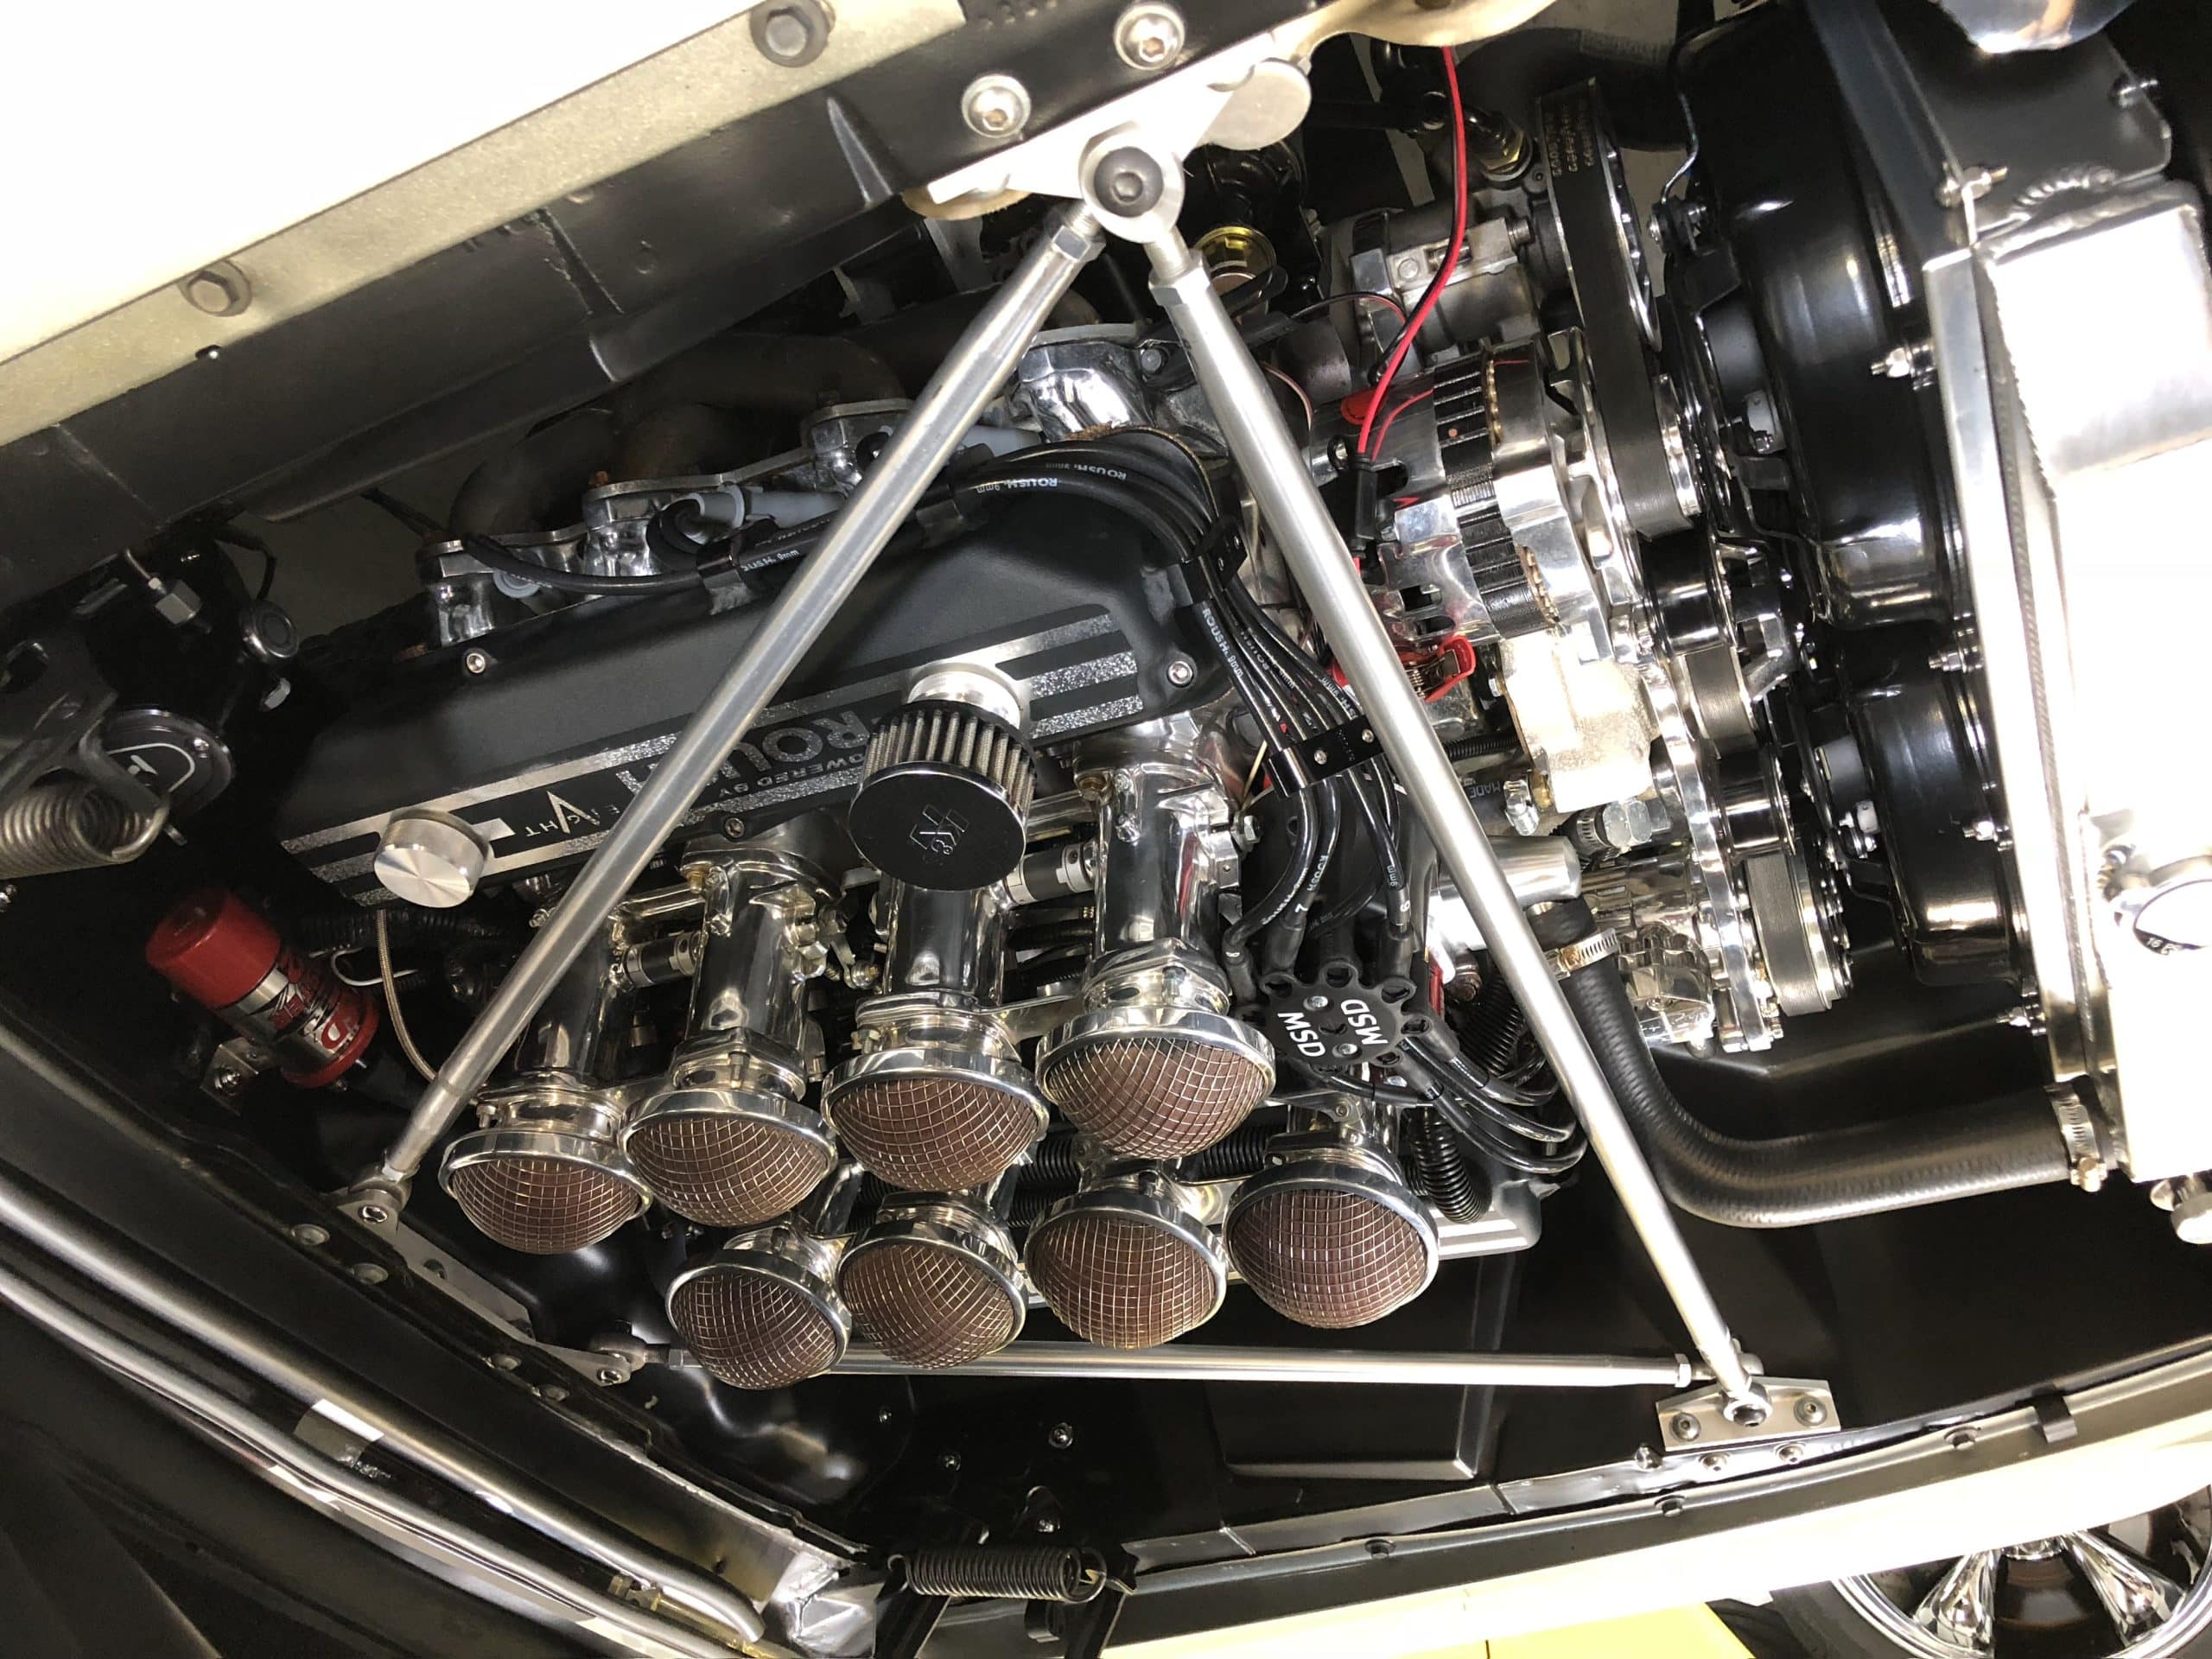 V8 Engines Have Been The Basis For Hot Rodding Since The First One Was Built.  This Roush 428 Features Fuel Injection And A Wild Sound.  It Powers The Eleanor Mustang In The Maxwell Family Collection.